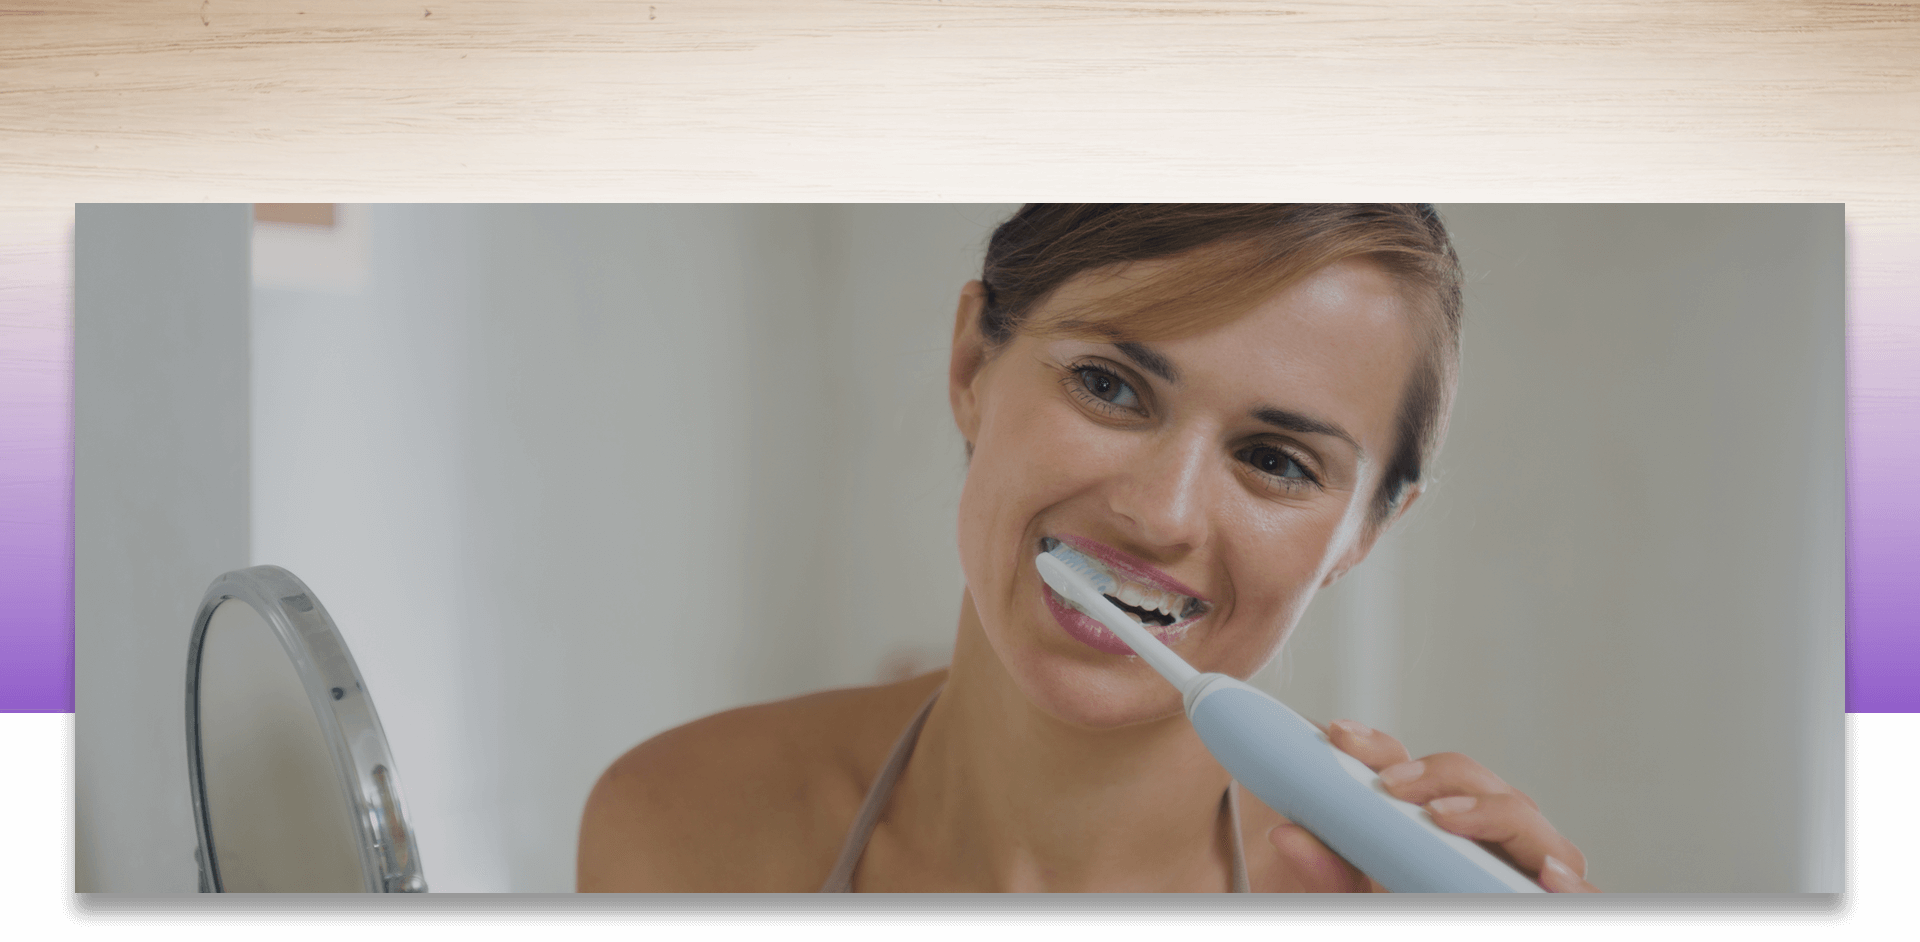 Smiling young woman brushing her teeth in front of a mirror